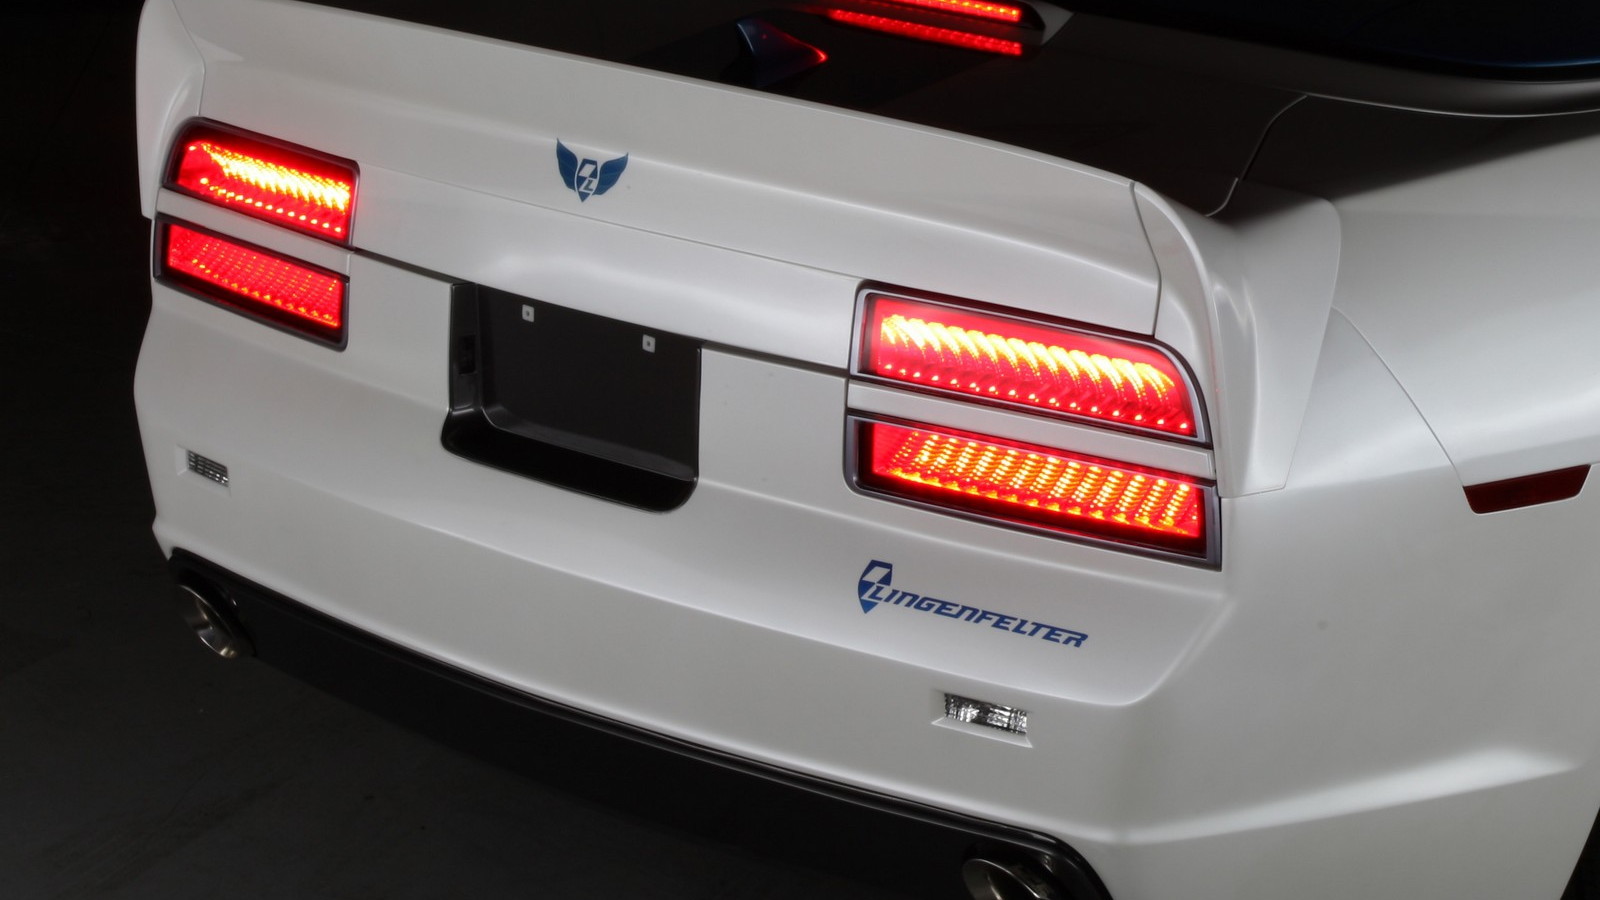 Production-spec Lingenfelter LTA Convertible based on the Chevrolet Camaro